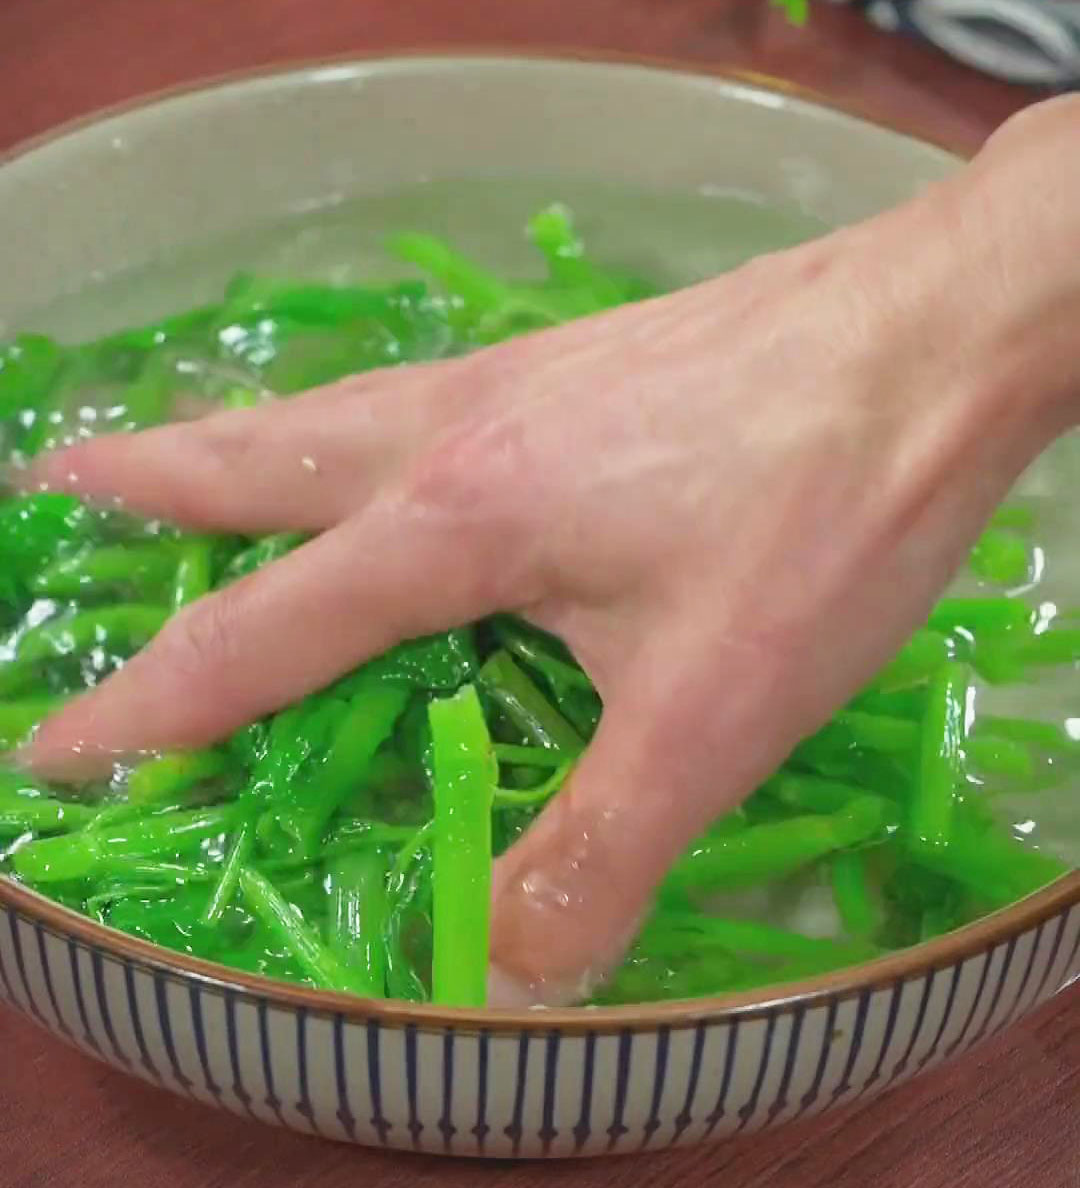 remove the Ong Choy from the pot and soak it in cold water